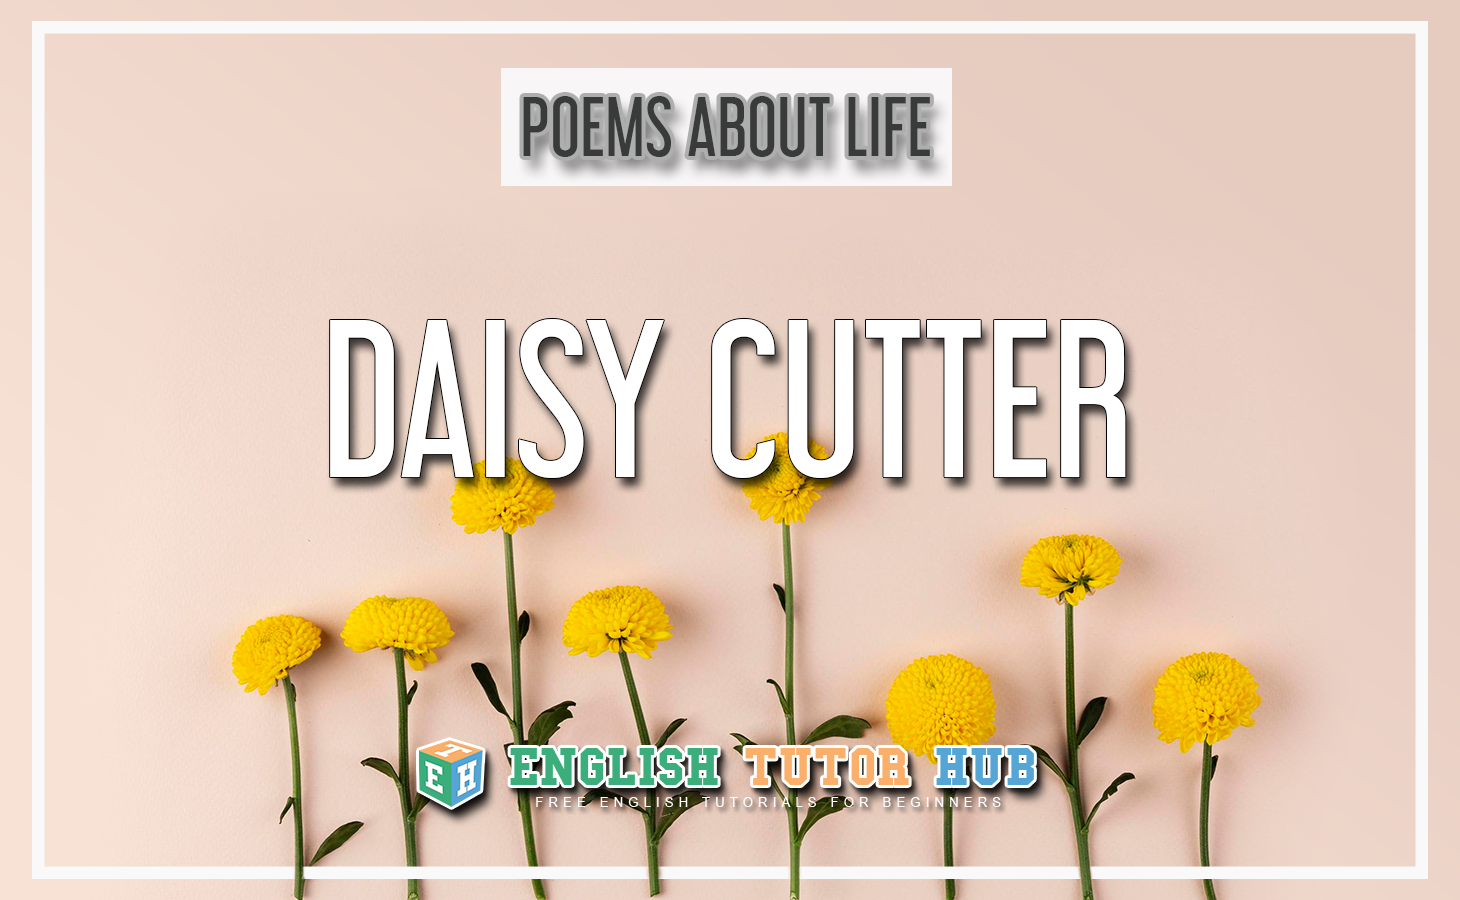 Poems About Life - Daisy Cutter